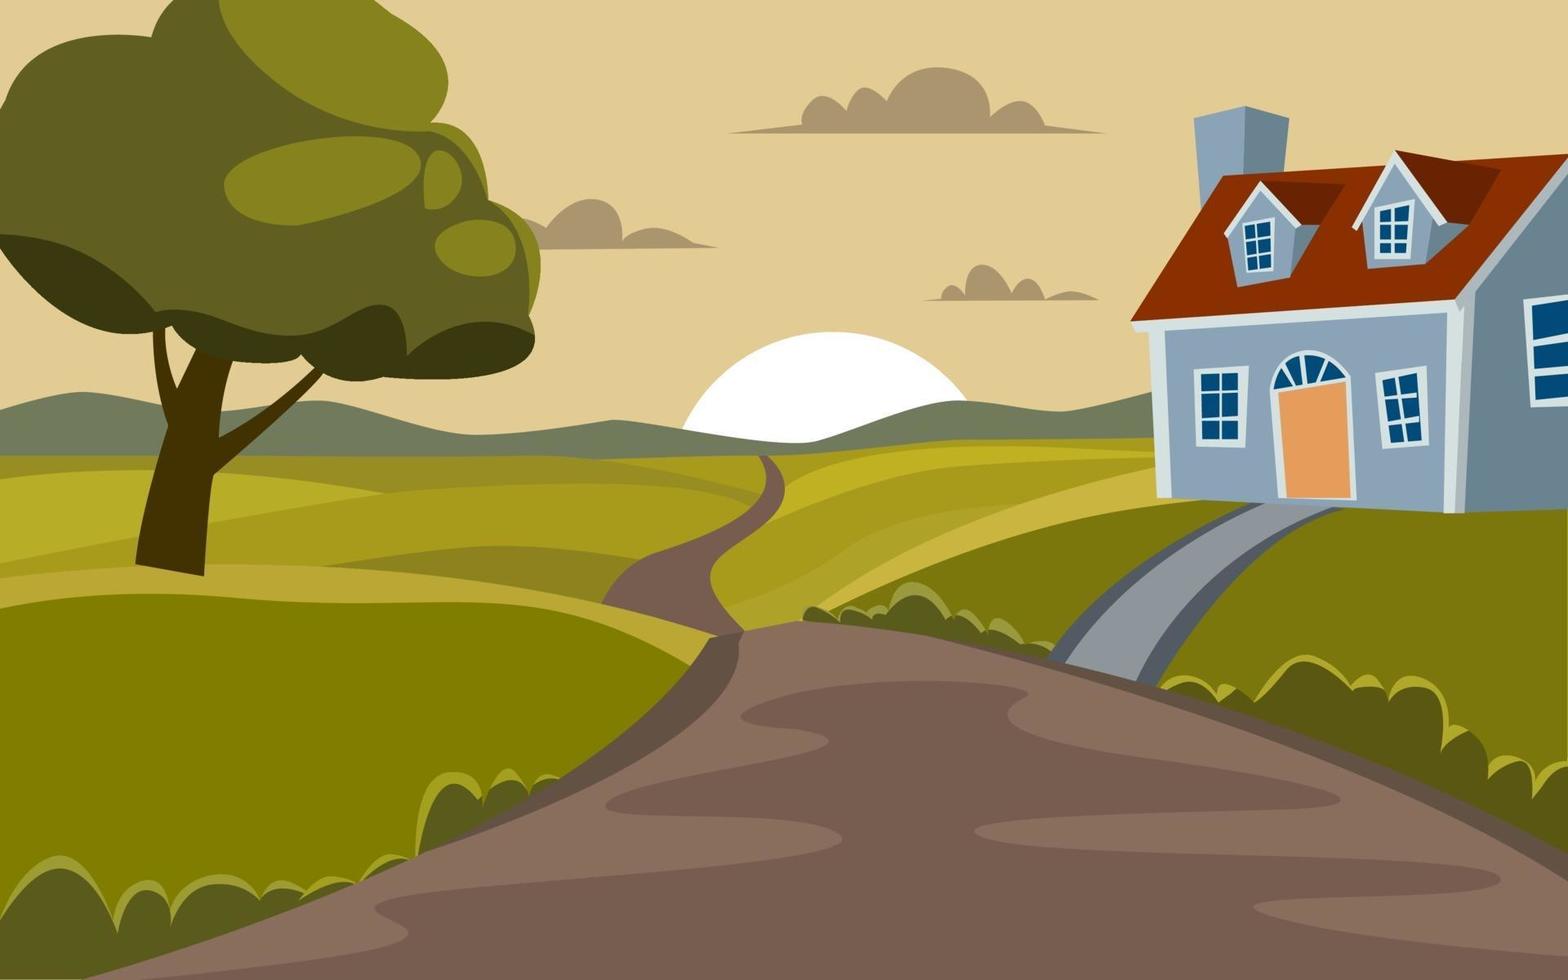 Cute Cartoon Countryside Landscape with House and Road vector